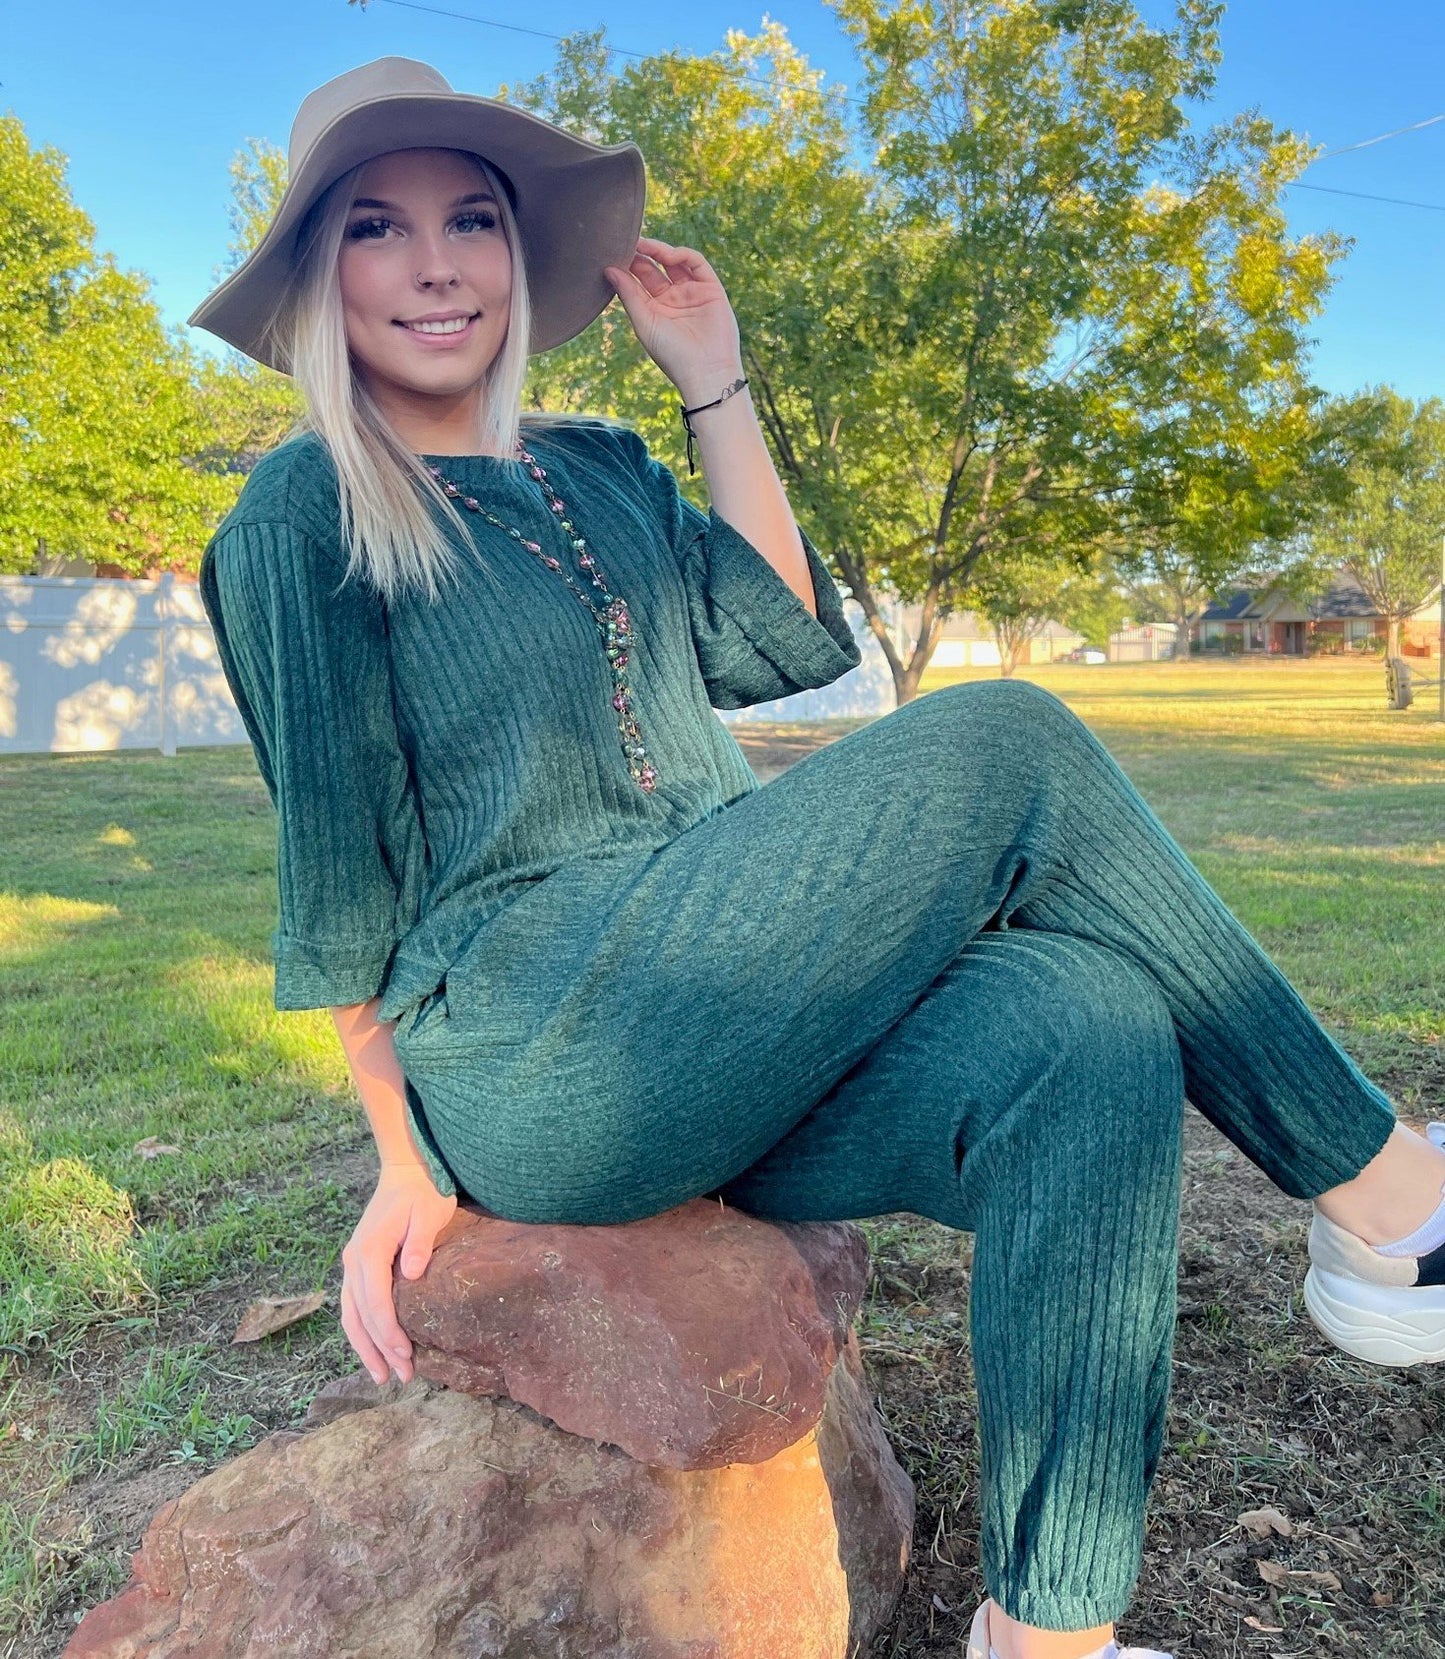 Ribbed Knit Jumpsuit With Pockets